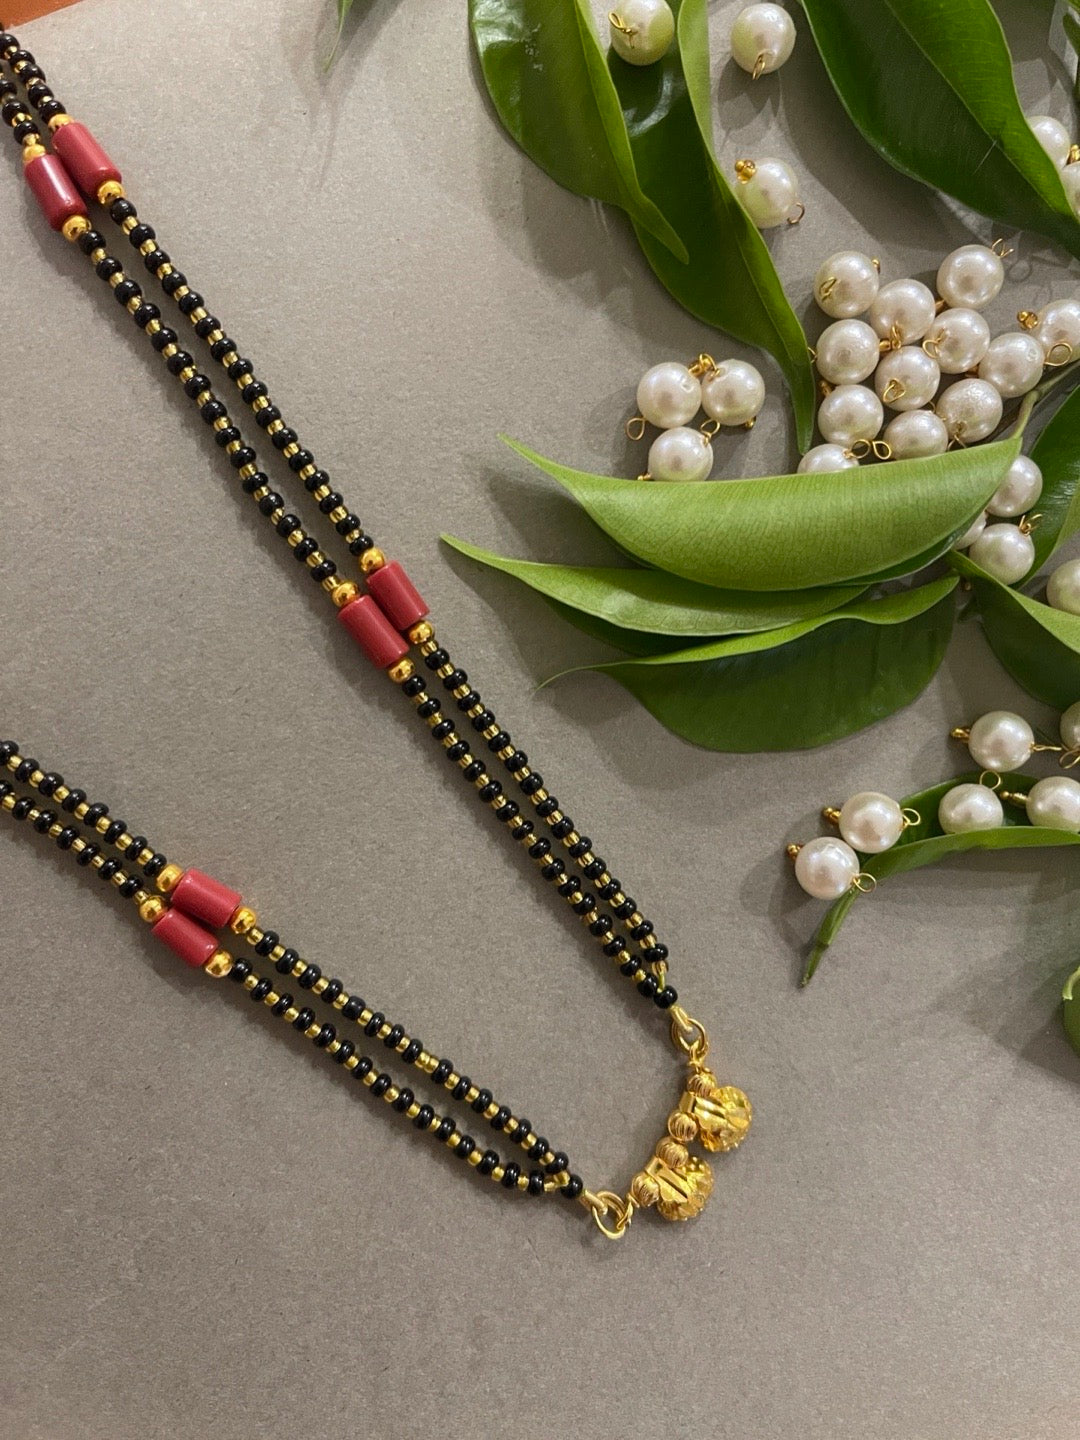 image for Traditional Marathi Short Mangalsutra Vati Designs Double Line Red And Black Beads Chain